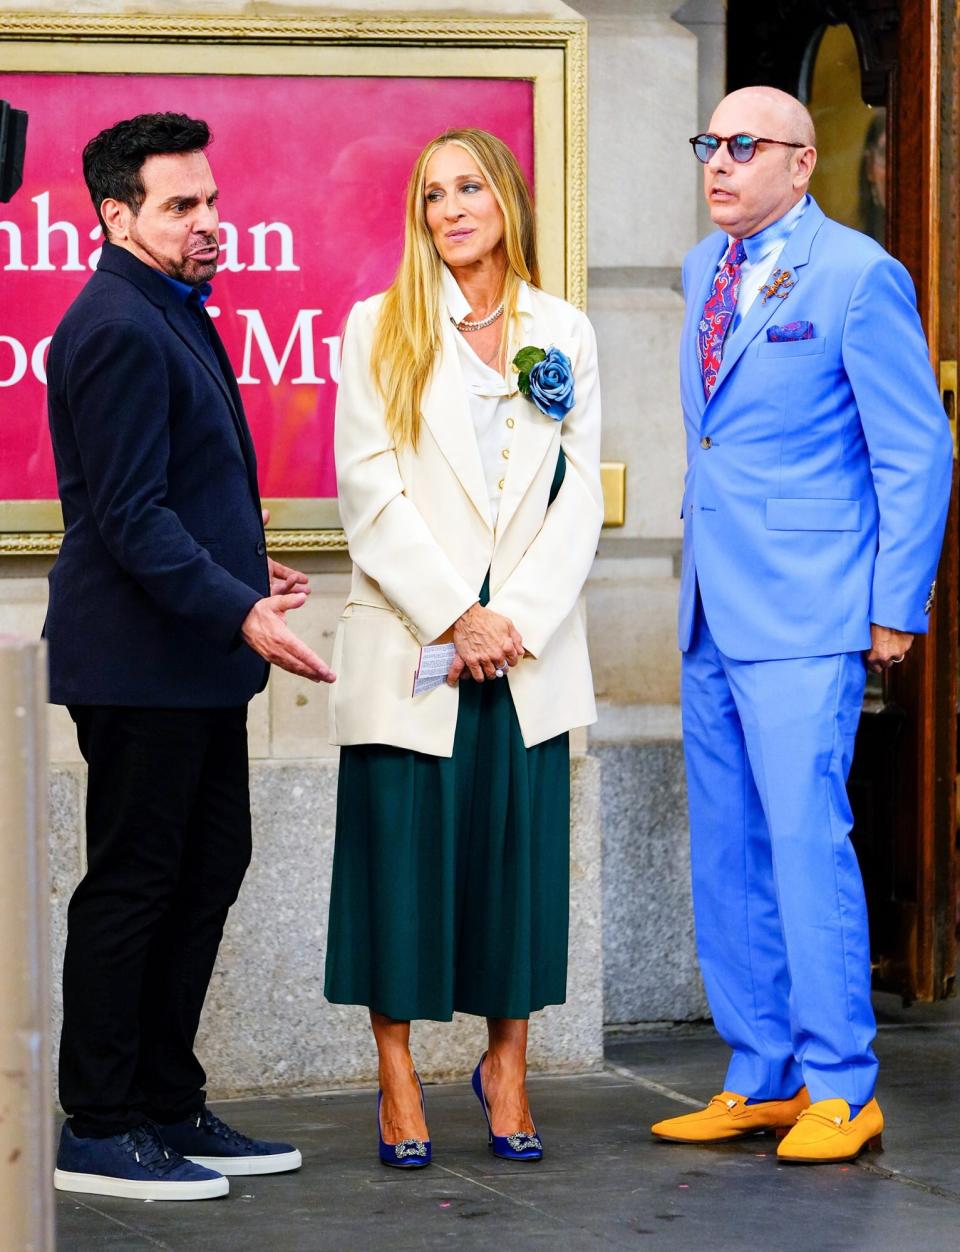 Mario Cantone, Sarah Jessica Parker and Willie Garson are seen filming "And Just Like That..." the follow up series to "Sex and the City" on July 23, 2021 in New York City.